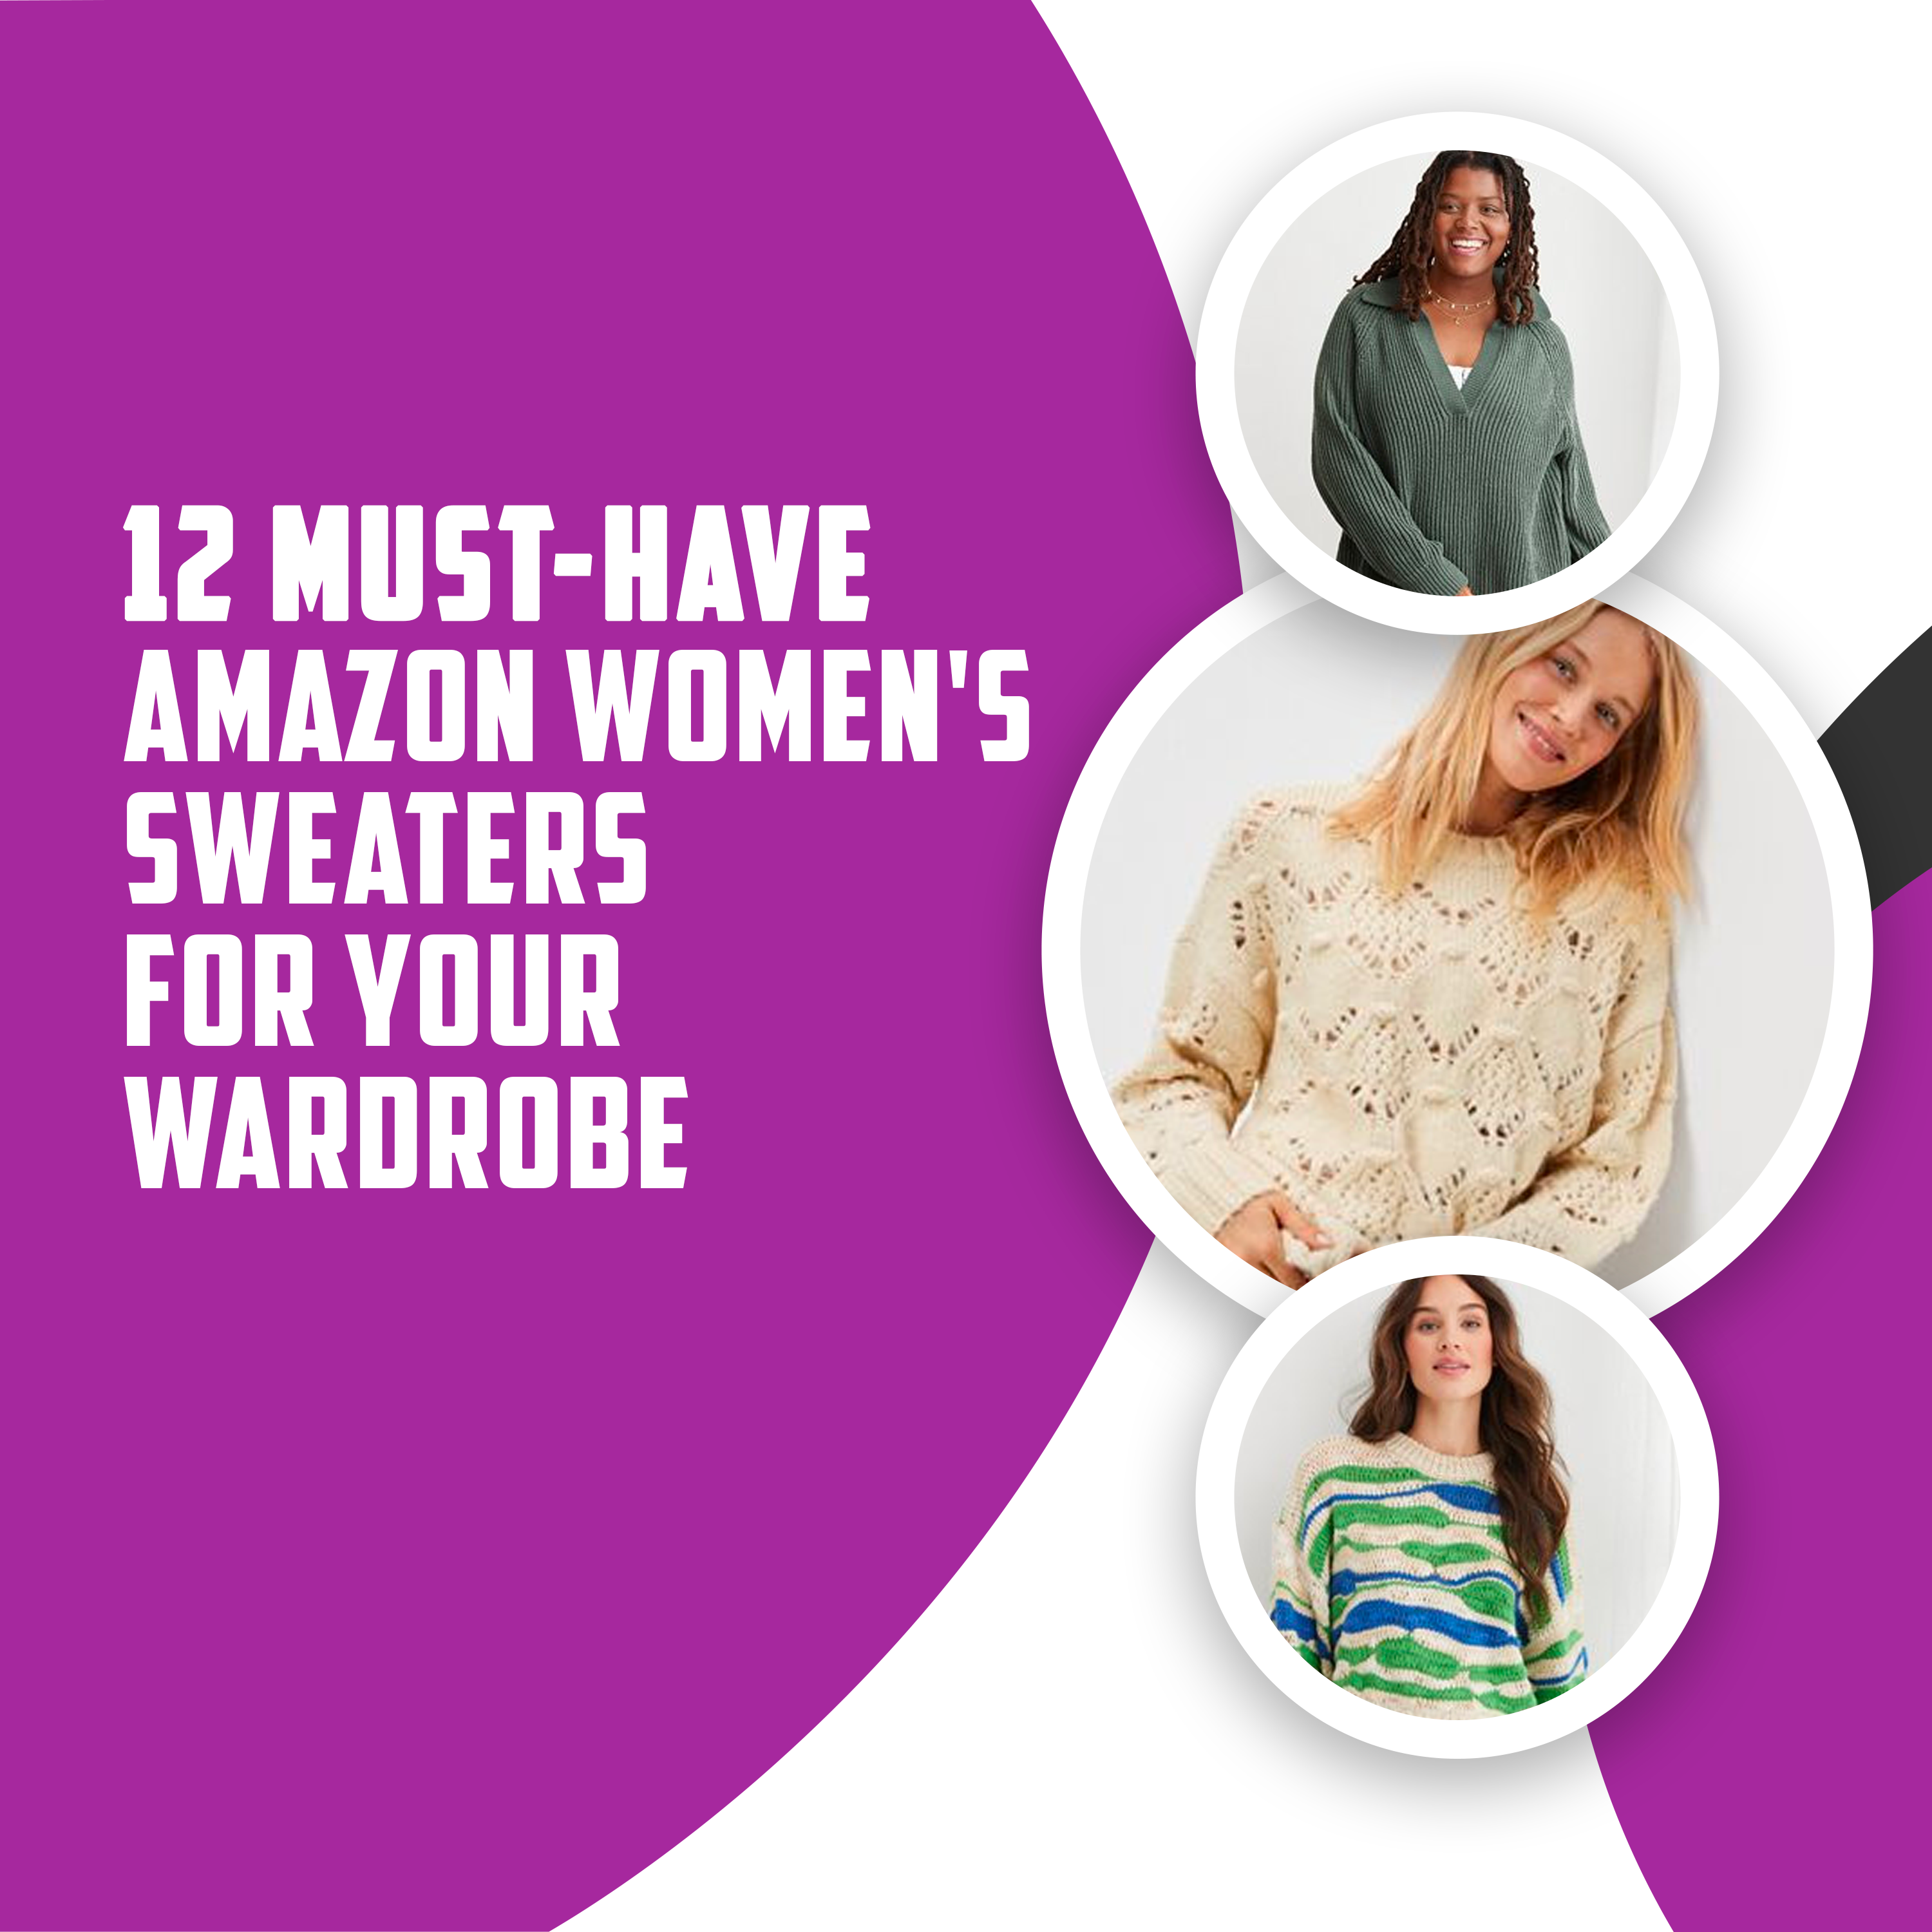 12 Must-Have Amazon Women’s Sweaters For Your Wardrobe